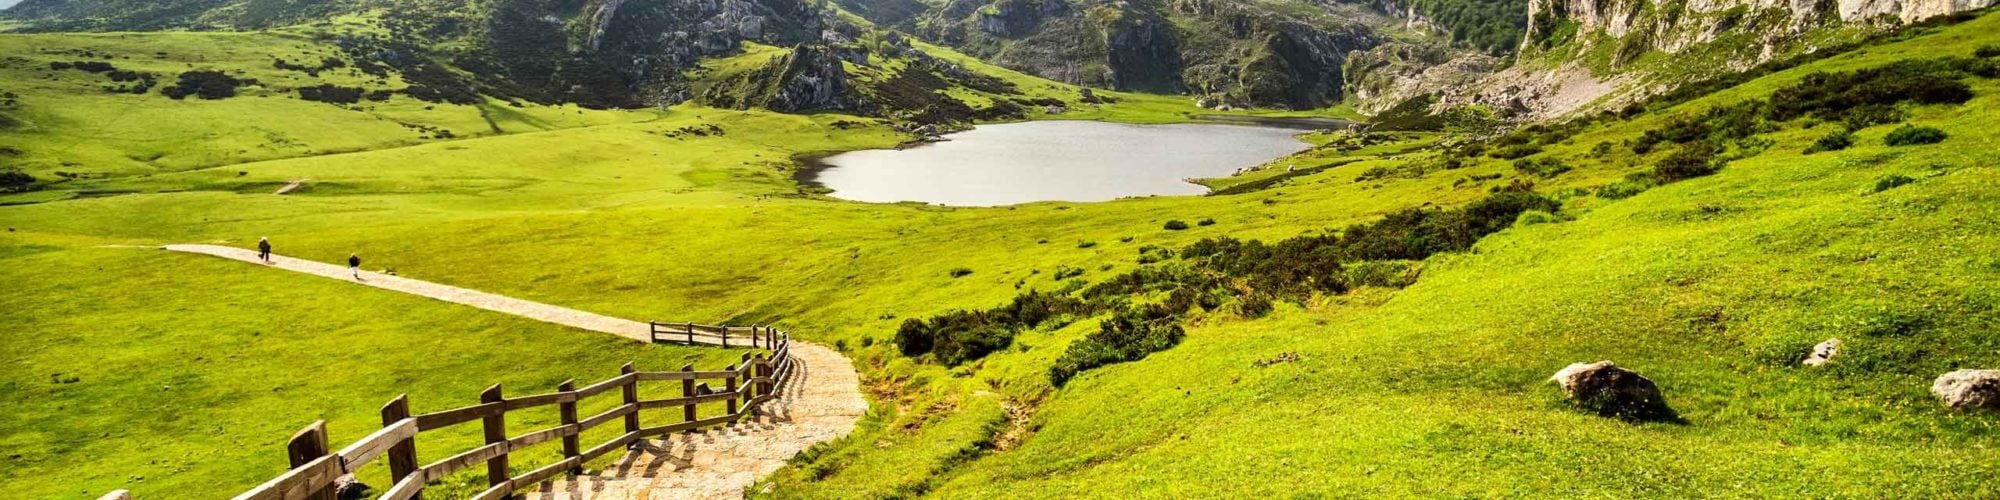 Asturias travel agents packages deals